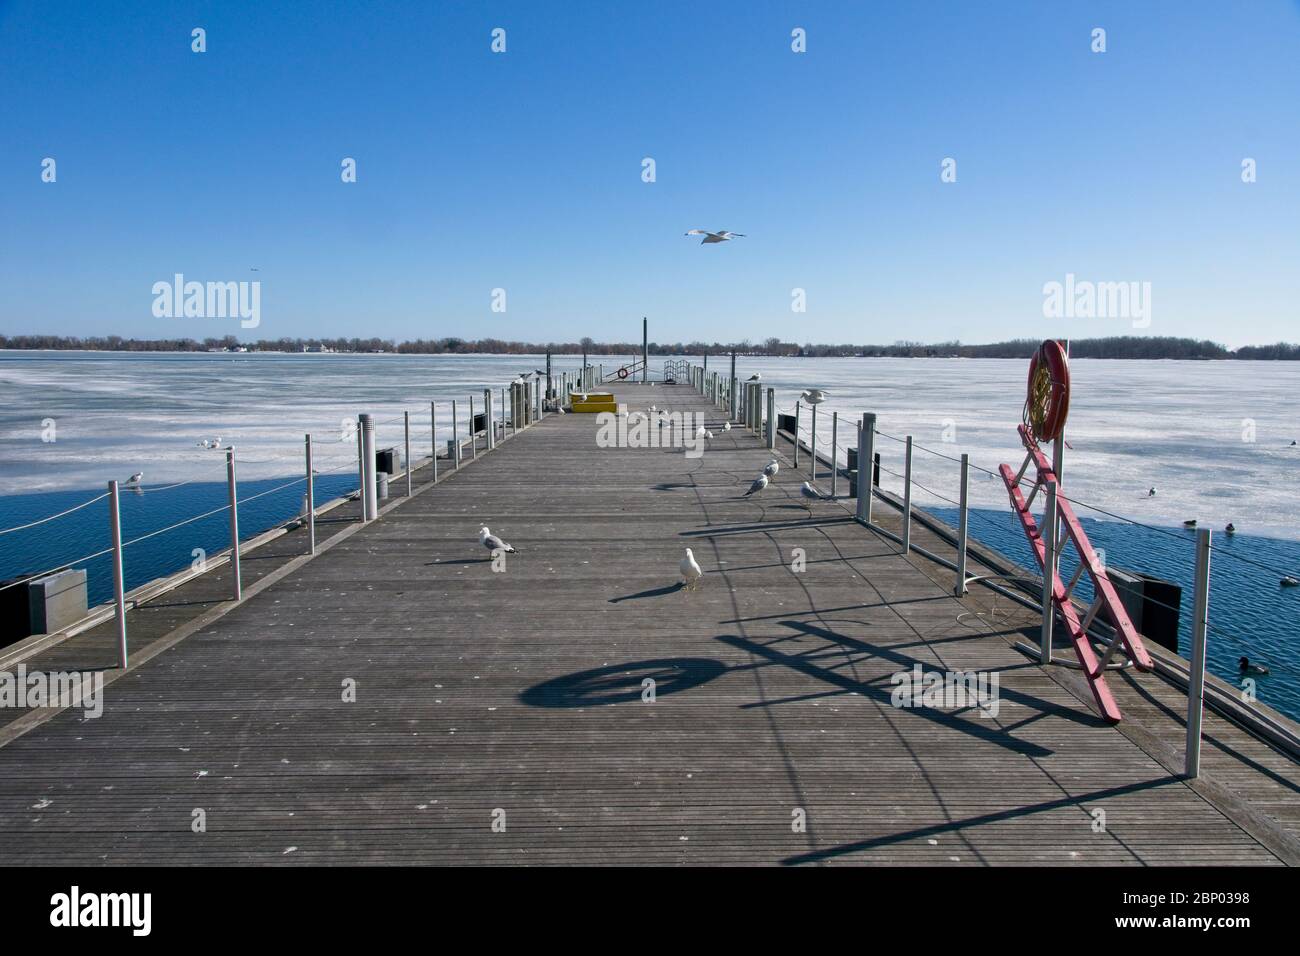 Toronto Canada - 24 March 2015 - Toronto Inner Harbour covered in ice Stock Photo